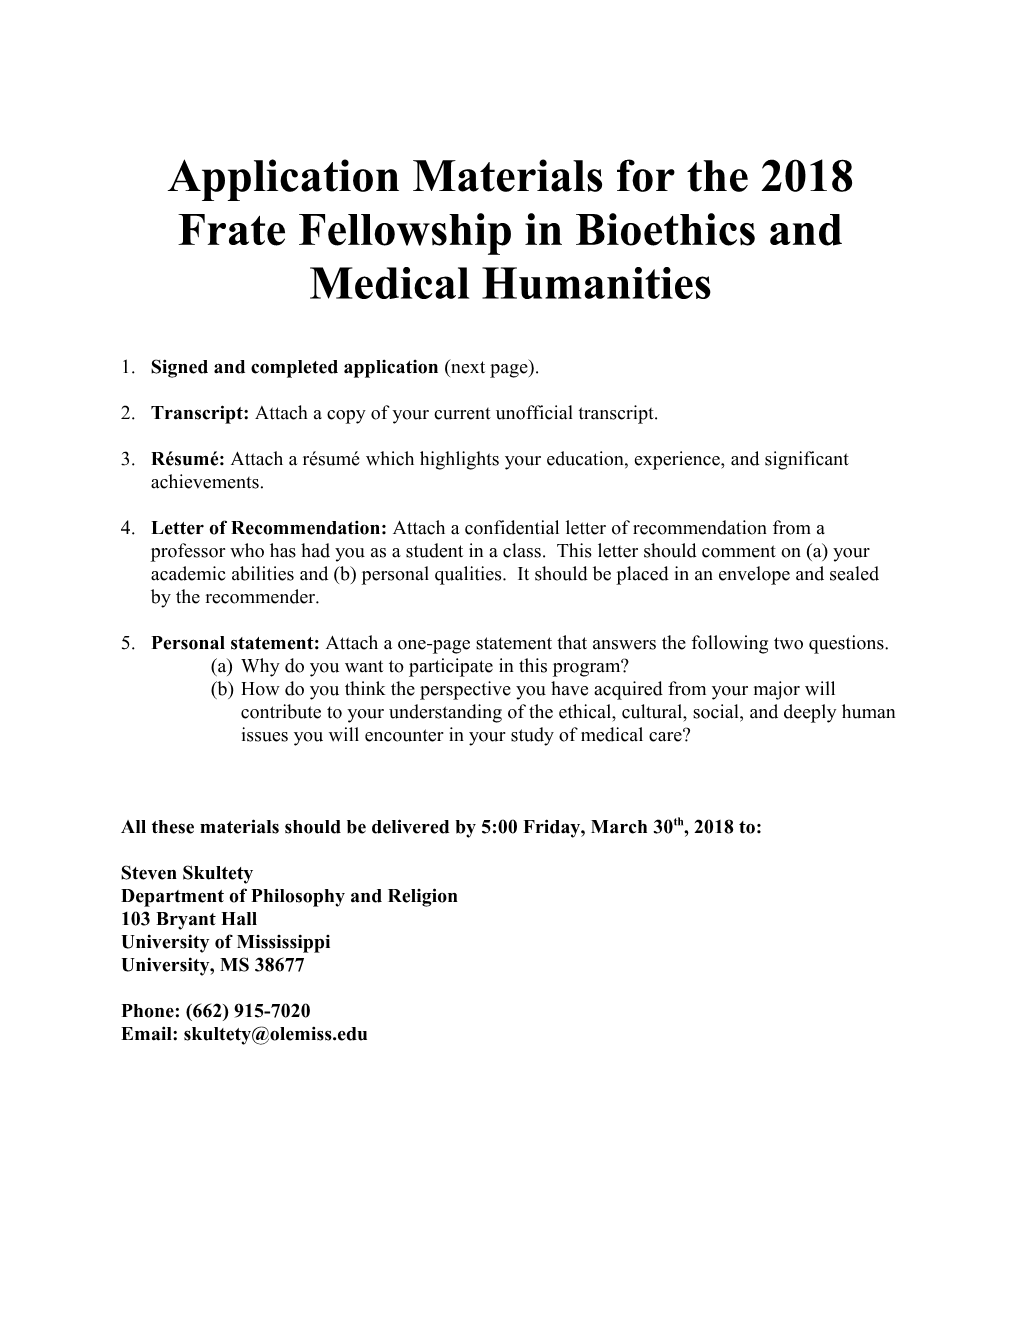 Materials Required to Apply to the Student Fellowship in Bioethics